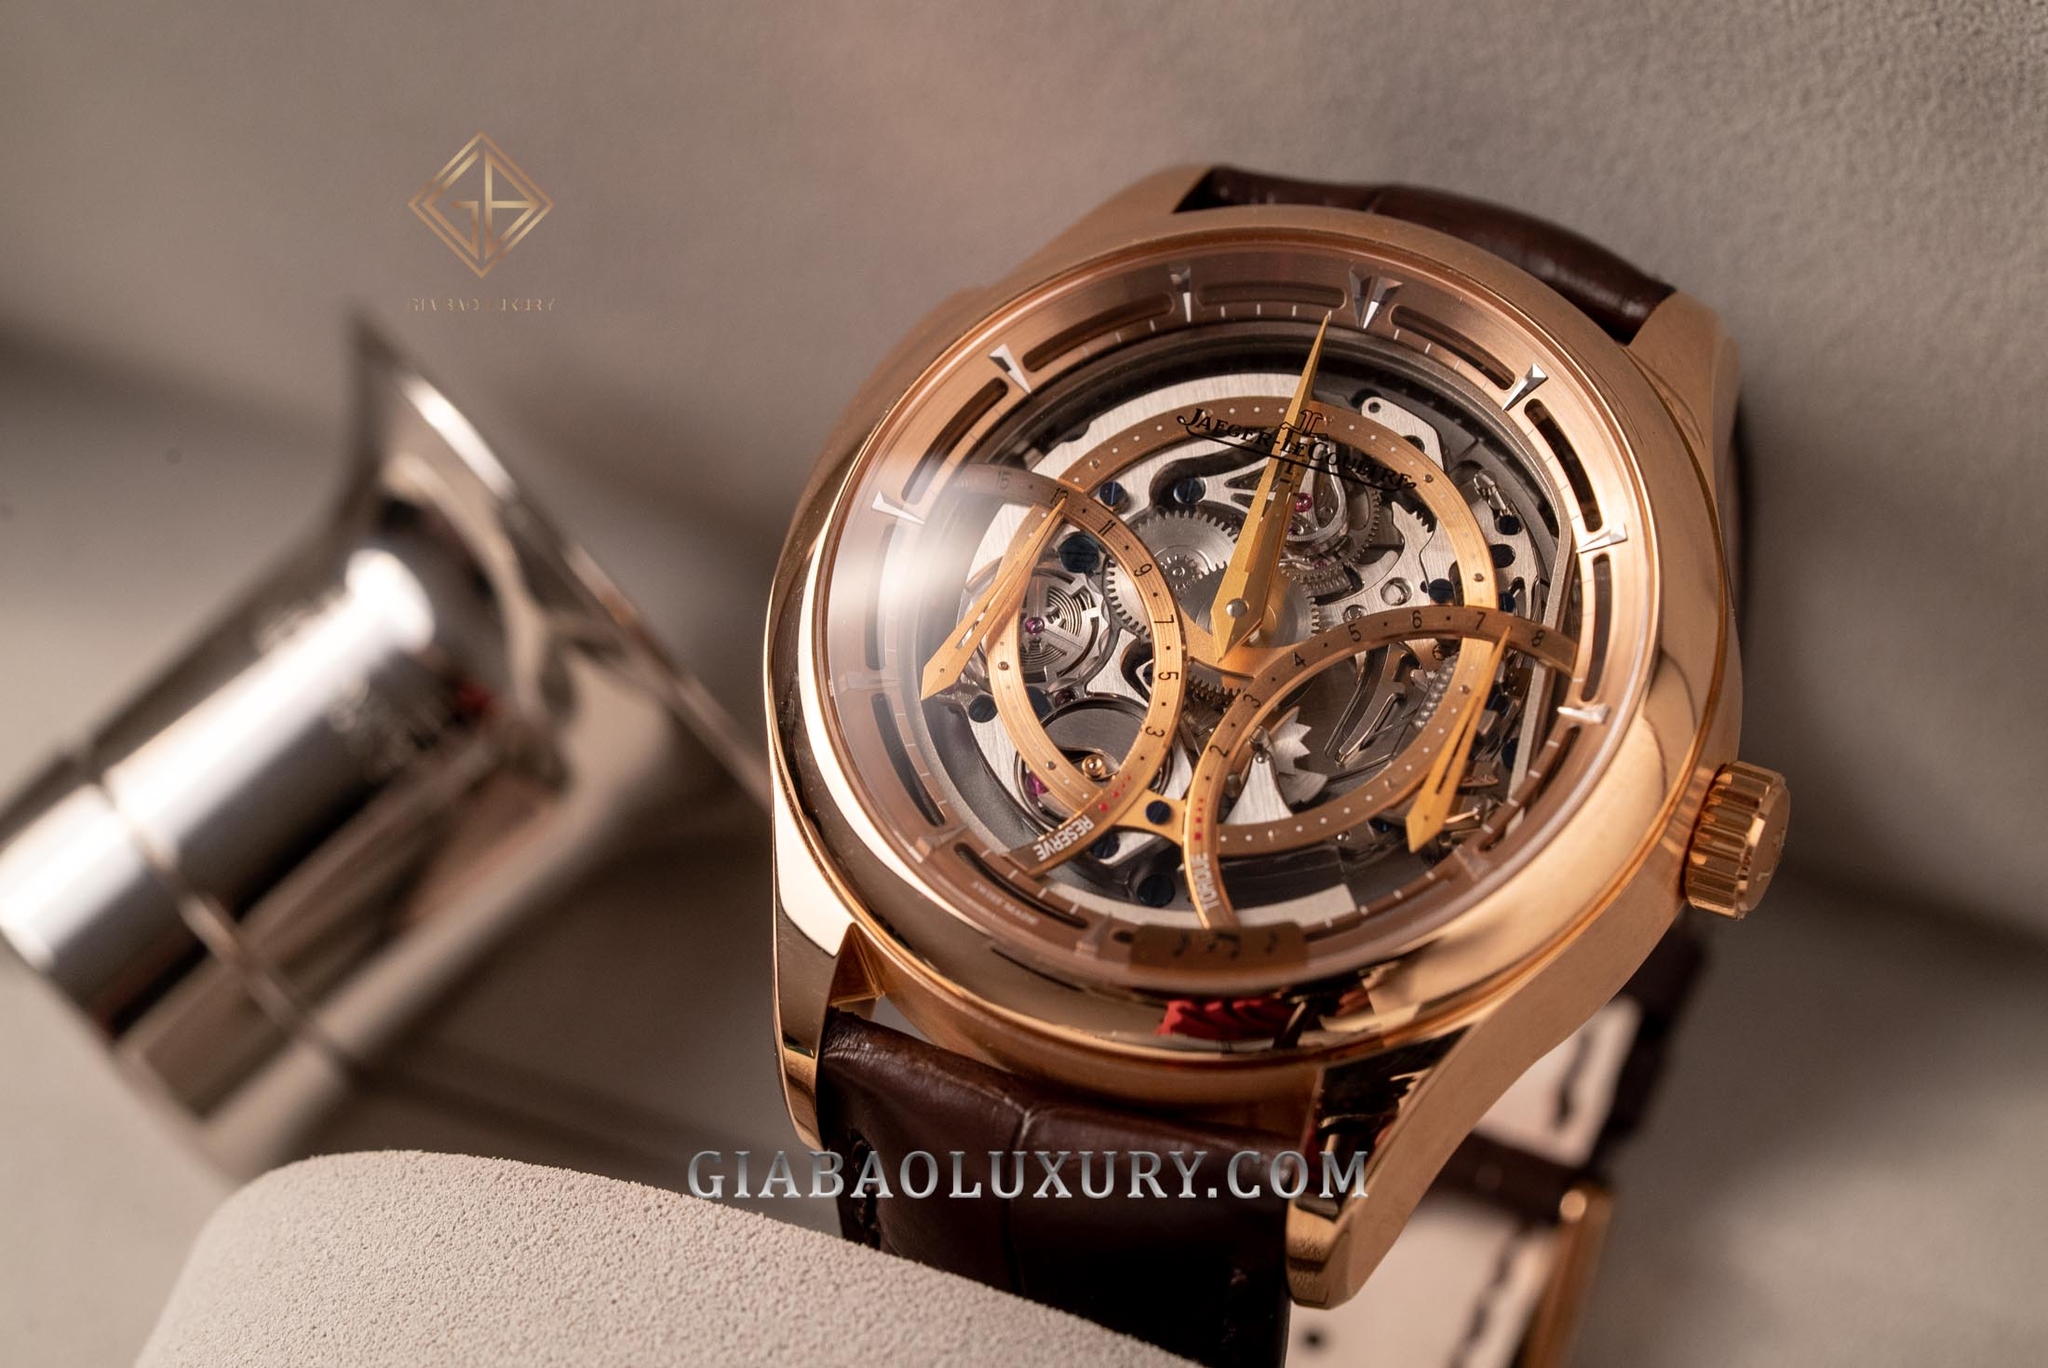  Đồng hồ Jaeger-LeCoultre Grande Tradition Minute Repeater